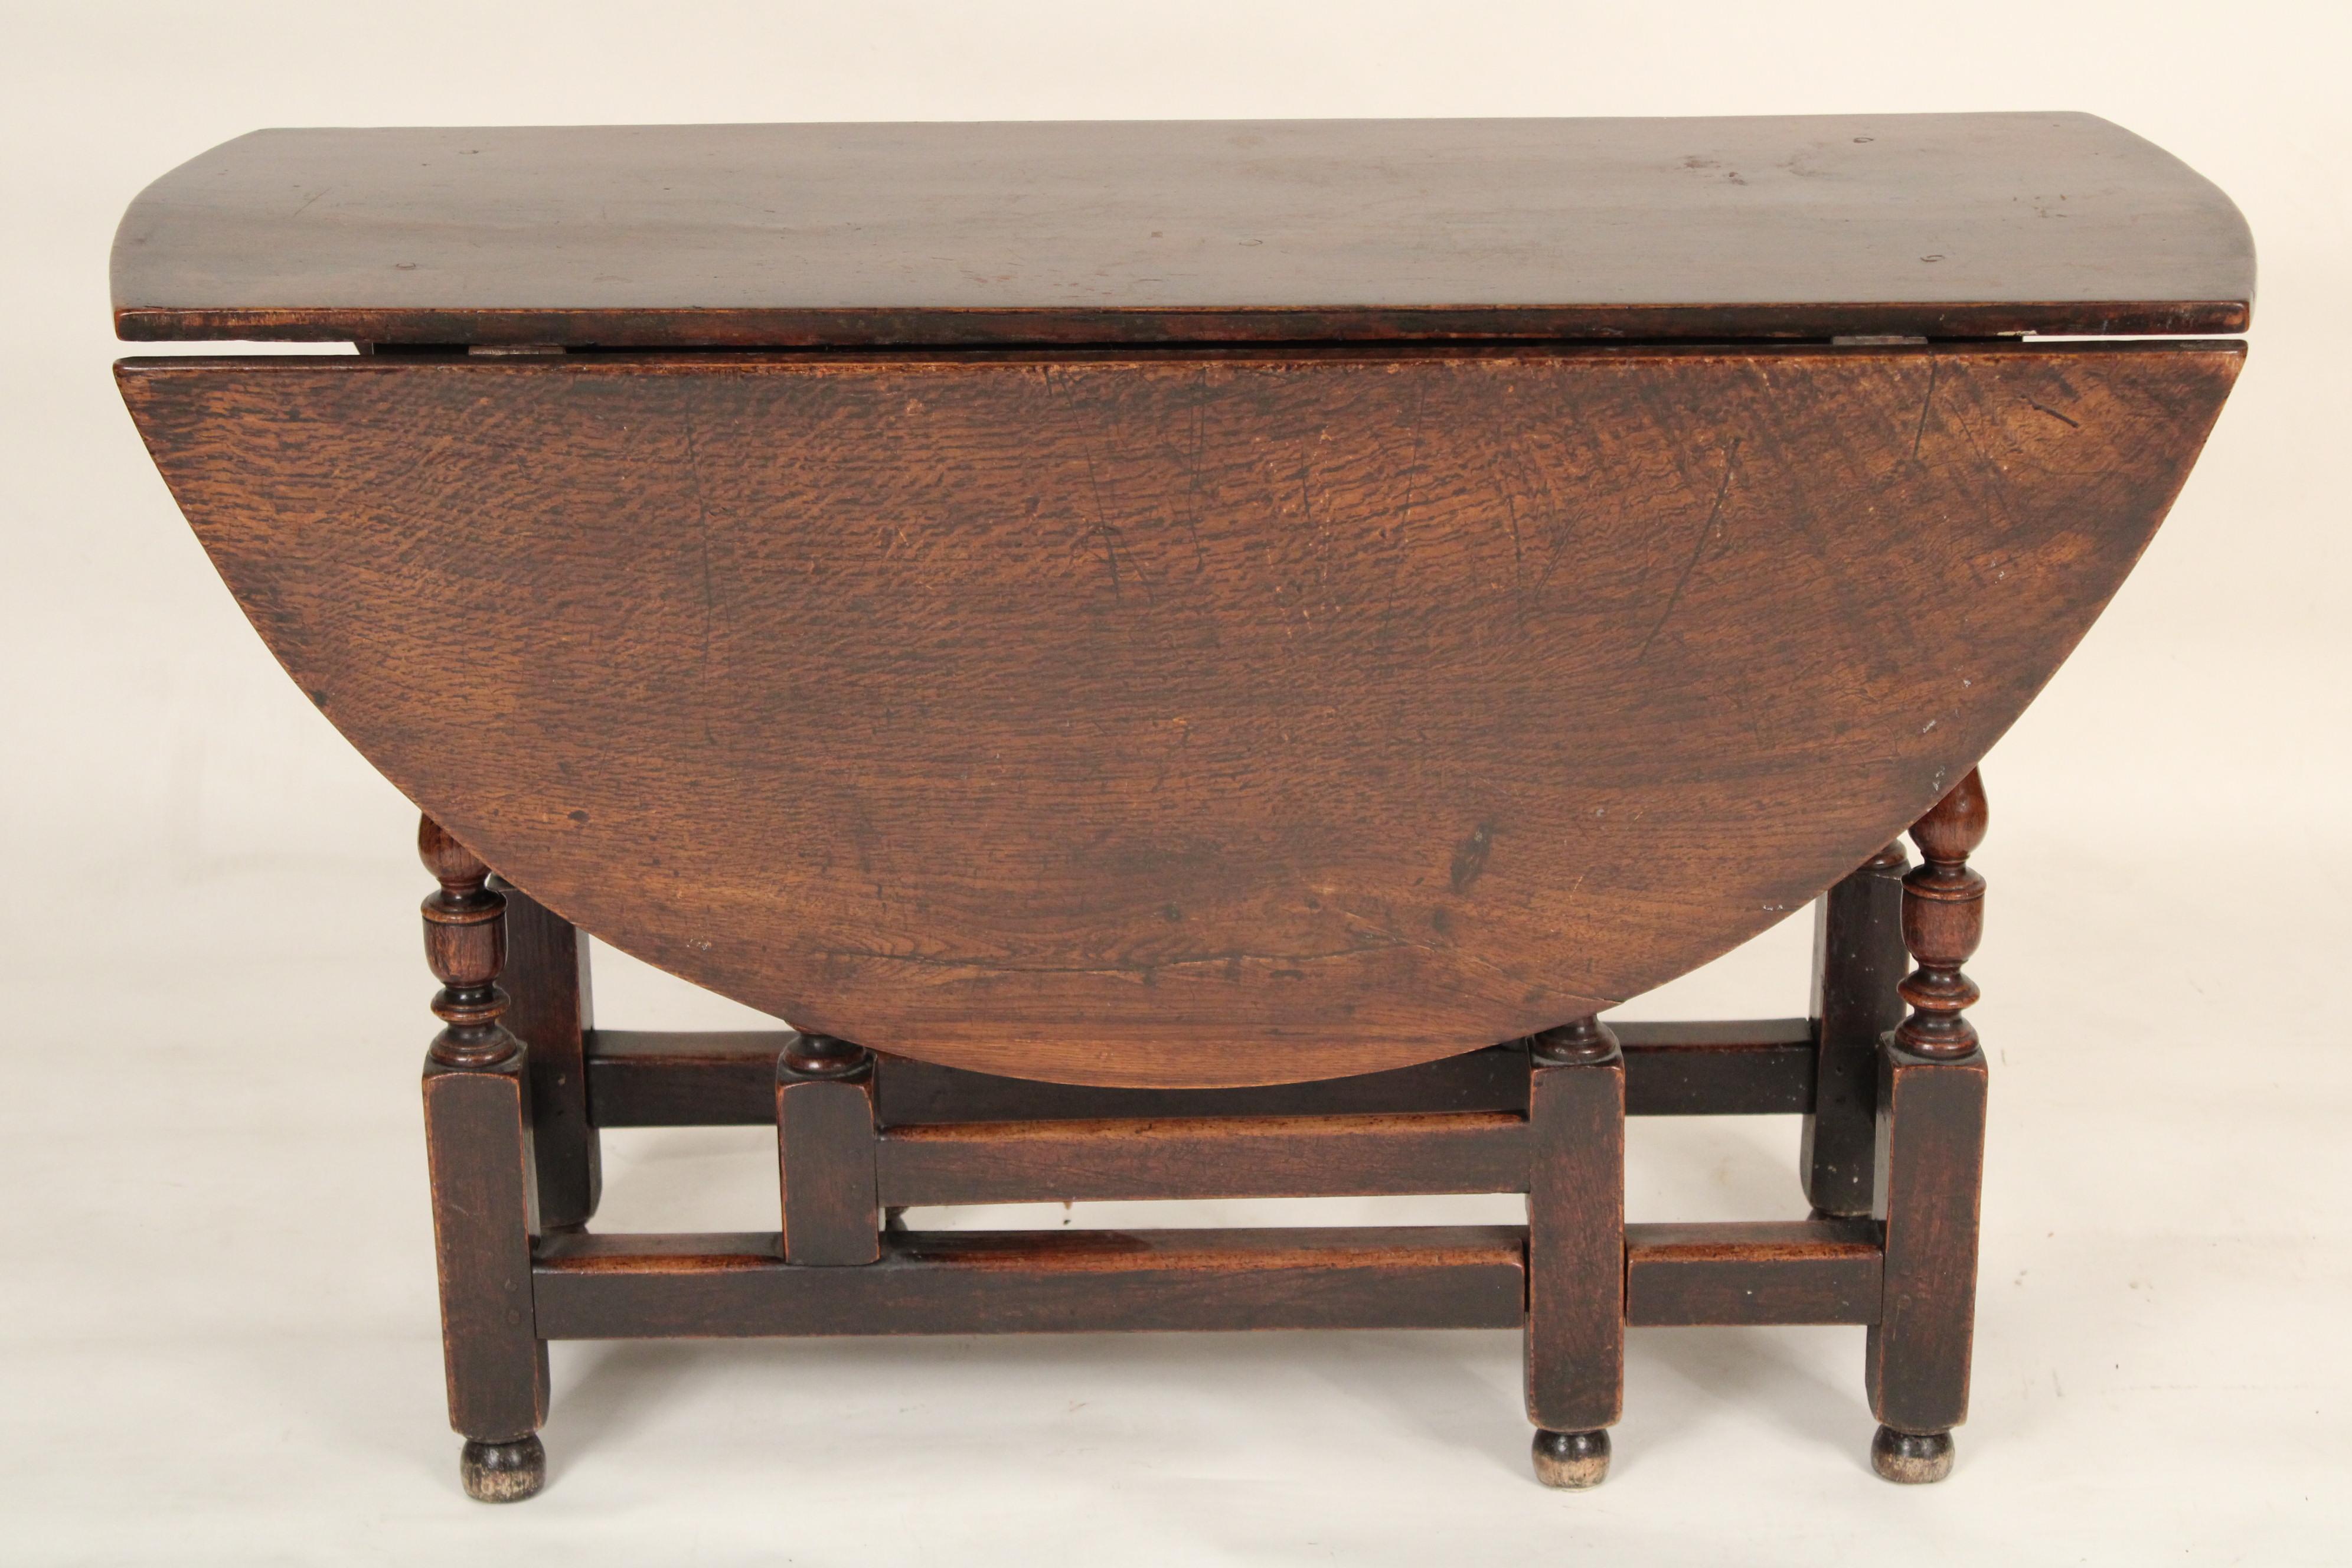 Antique William & Mary style English oak gate leg table, 19th century. Dimensions when drop leafs are lowered, height 28.75